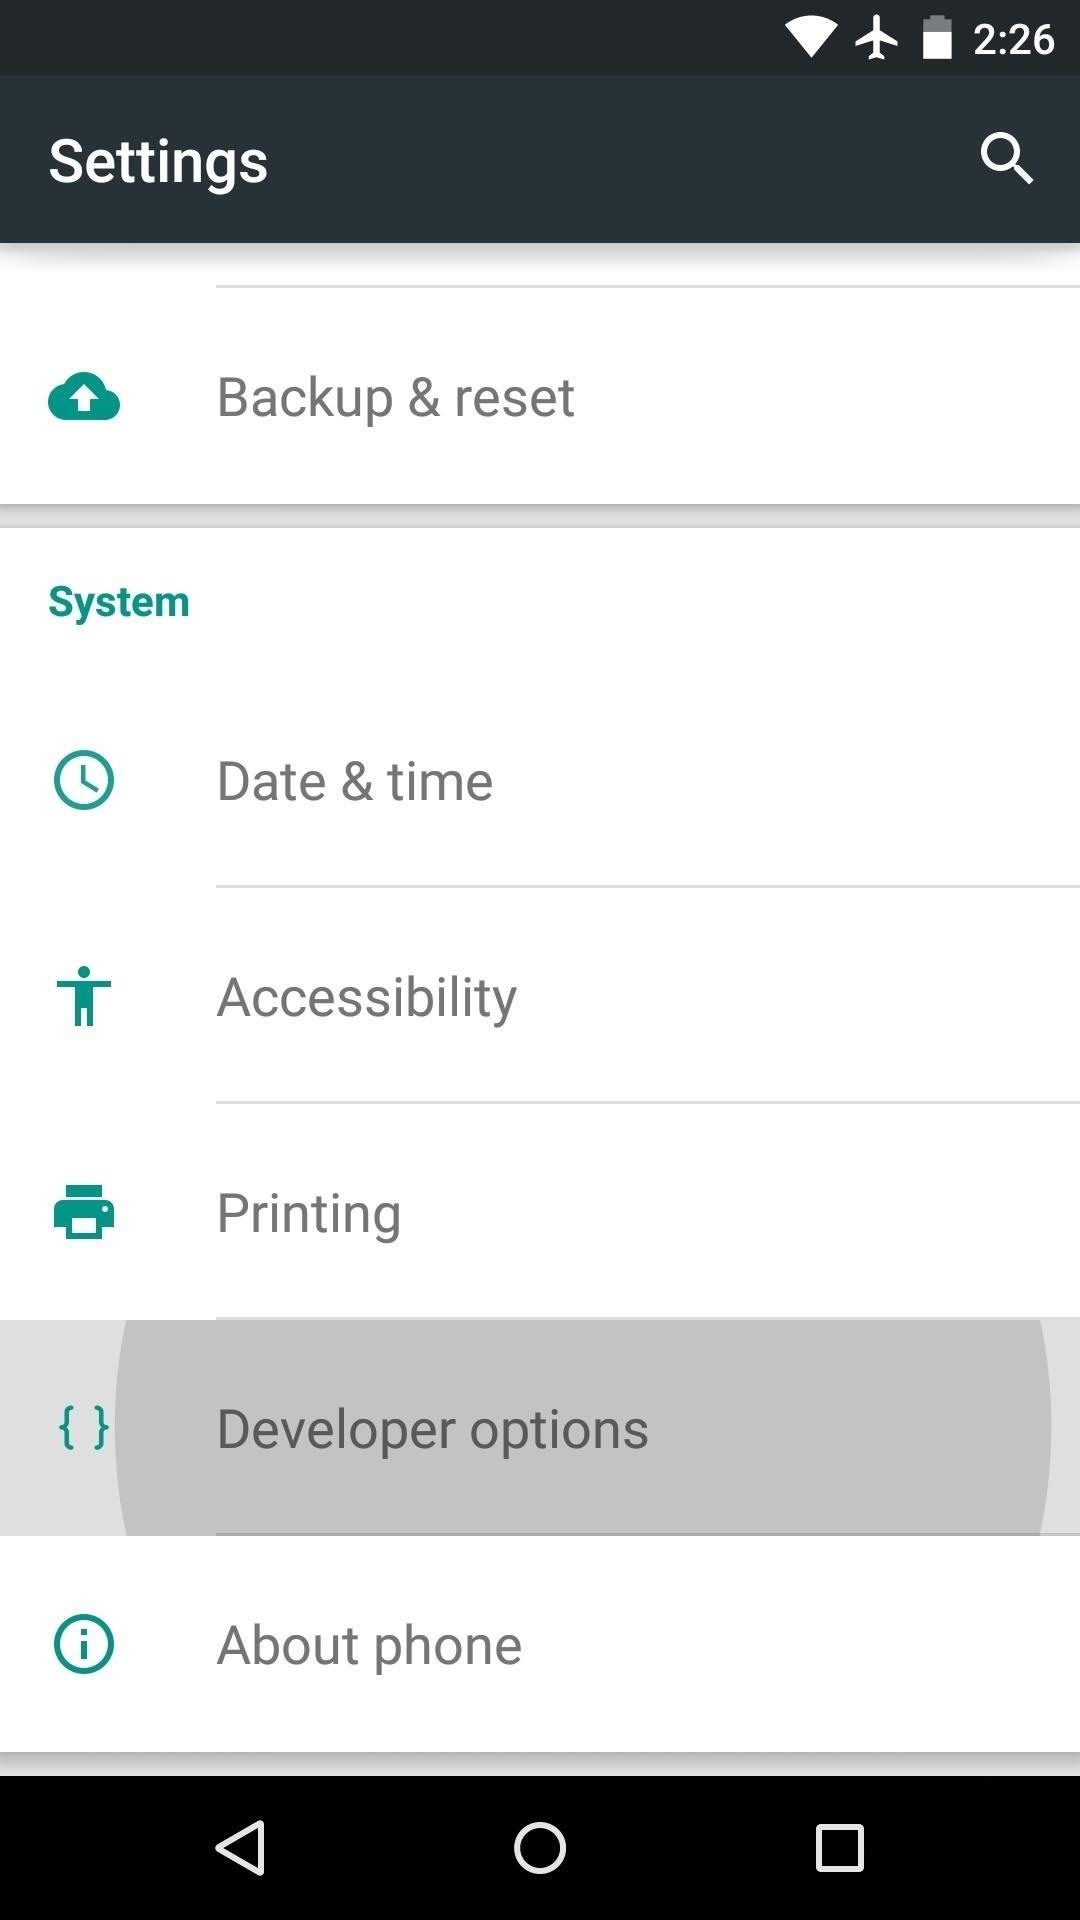 How to Install the Android M Preview on Your Nexus Device (Using Windows)